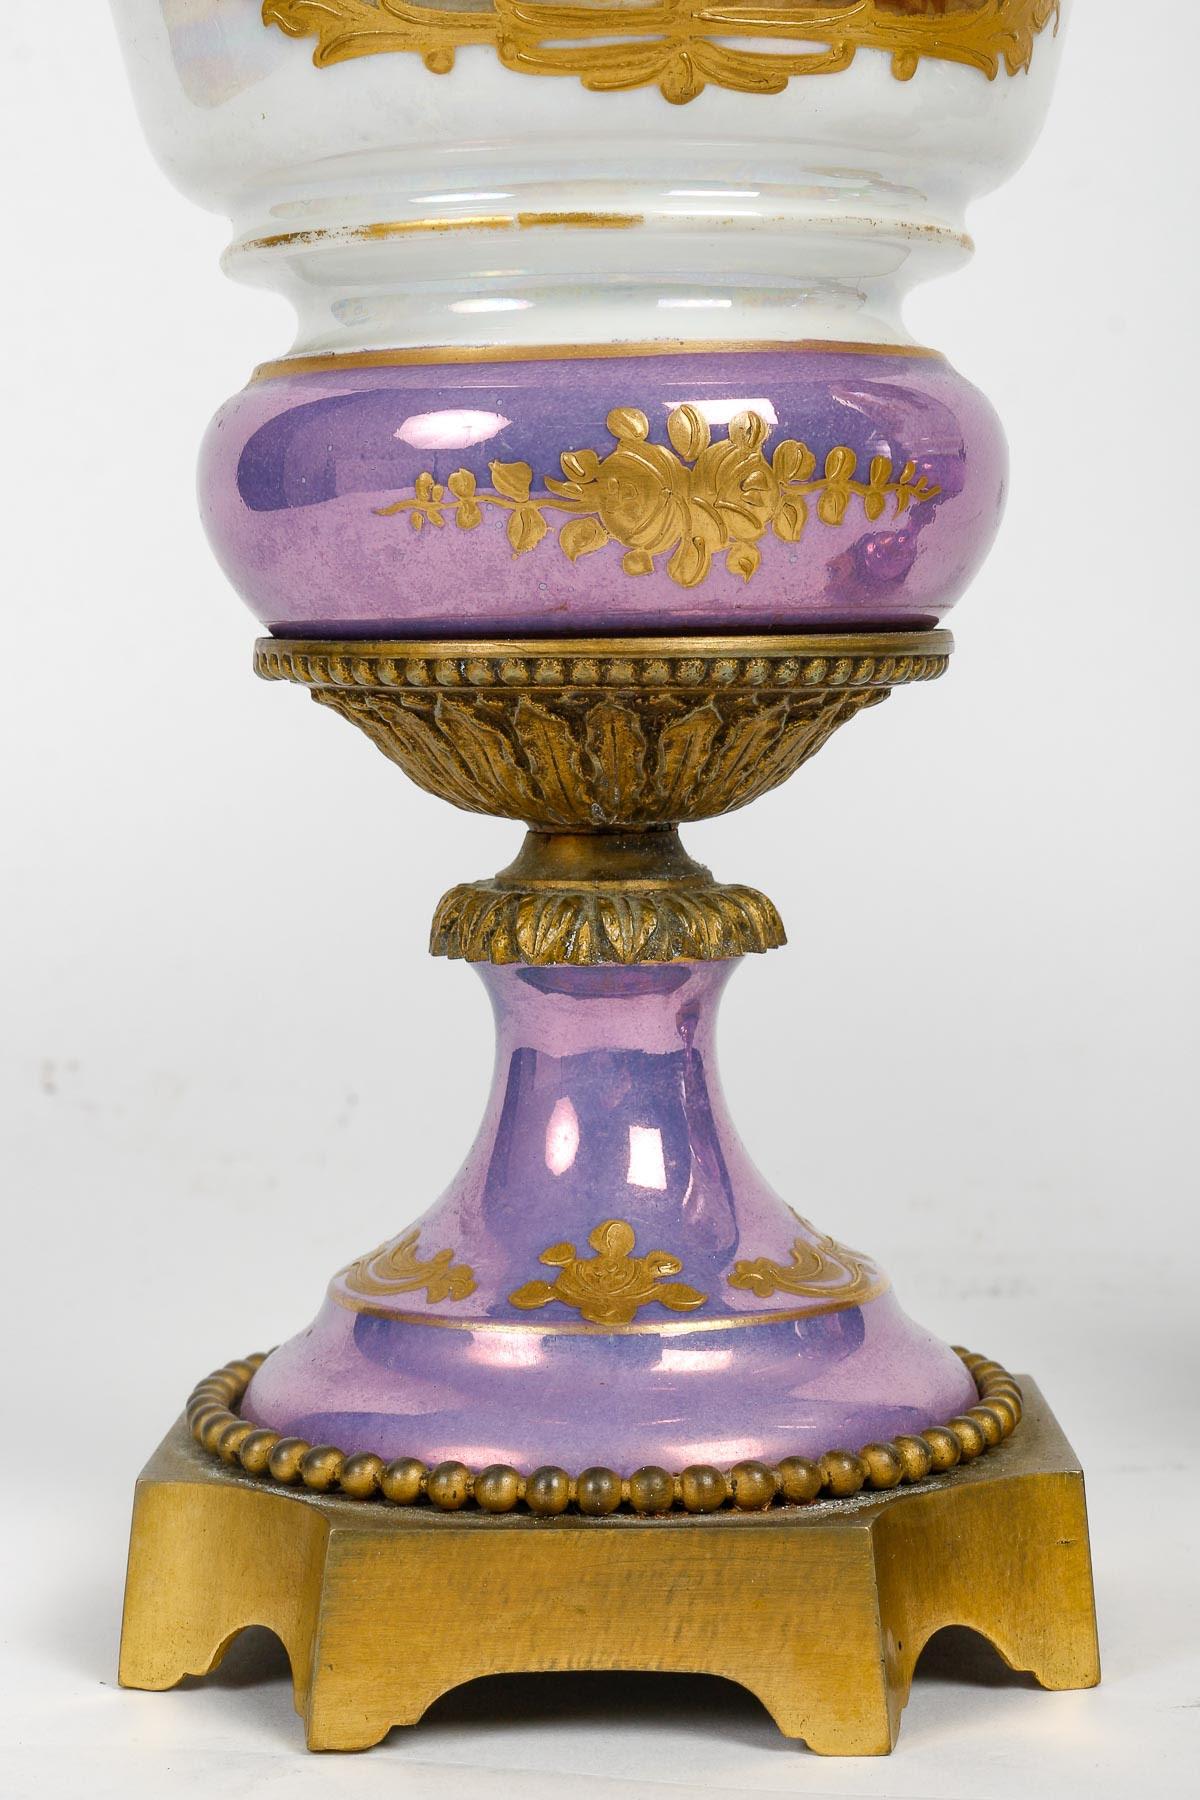 French Pair of Iridescent Sèvres Porcelain and Gilt Bronze Covered Vases, 19th Century.